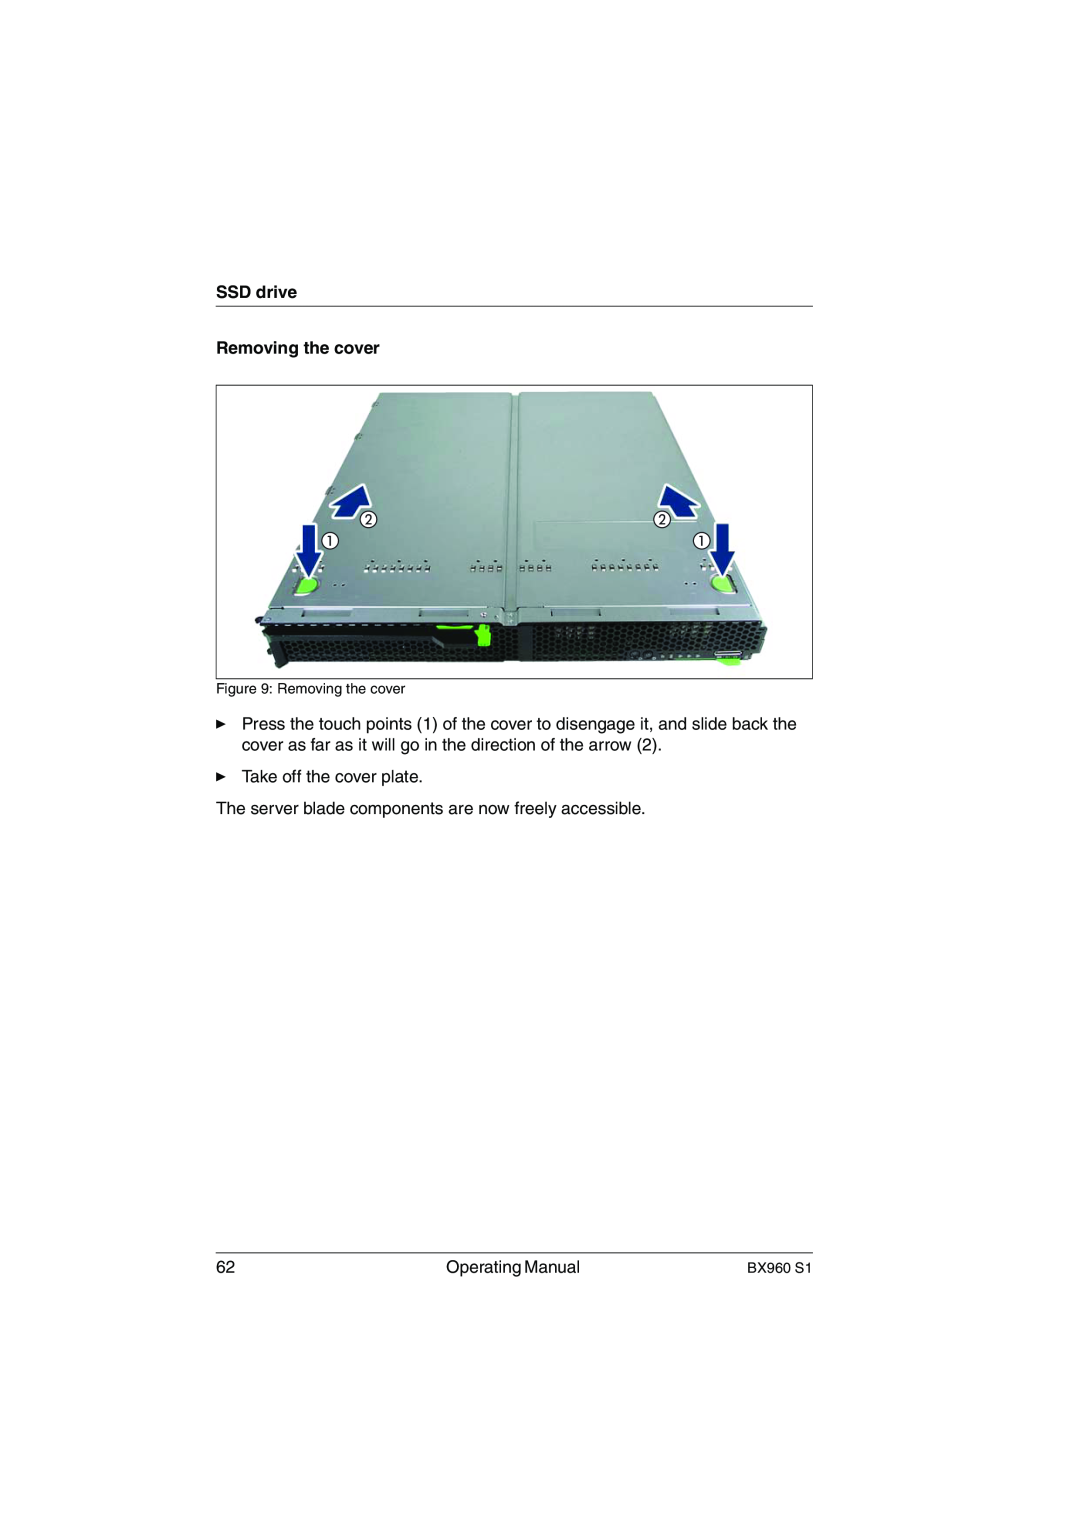 Fujitsu BX960 S1 manual Removing the cover, SSD drive, Ê Take off the cover plate, Operating Manual 